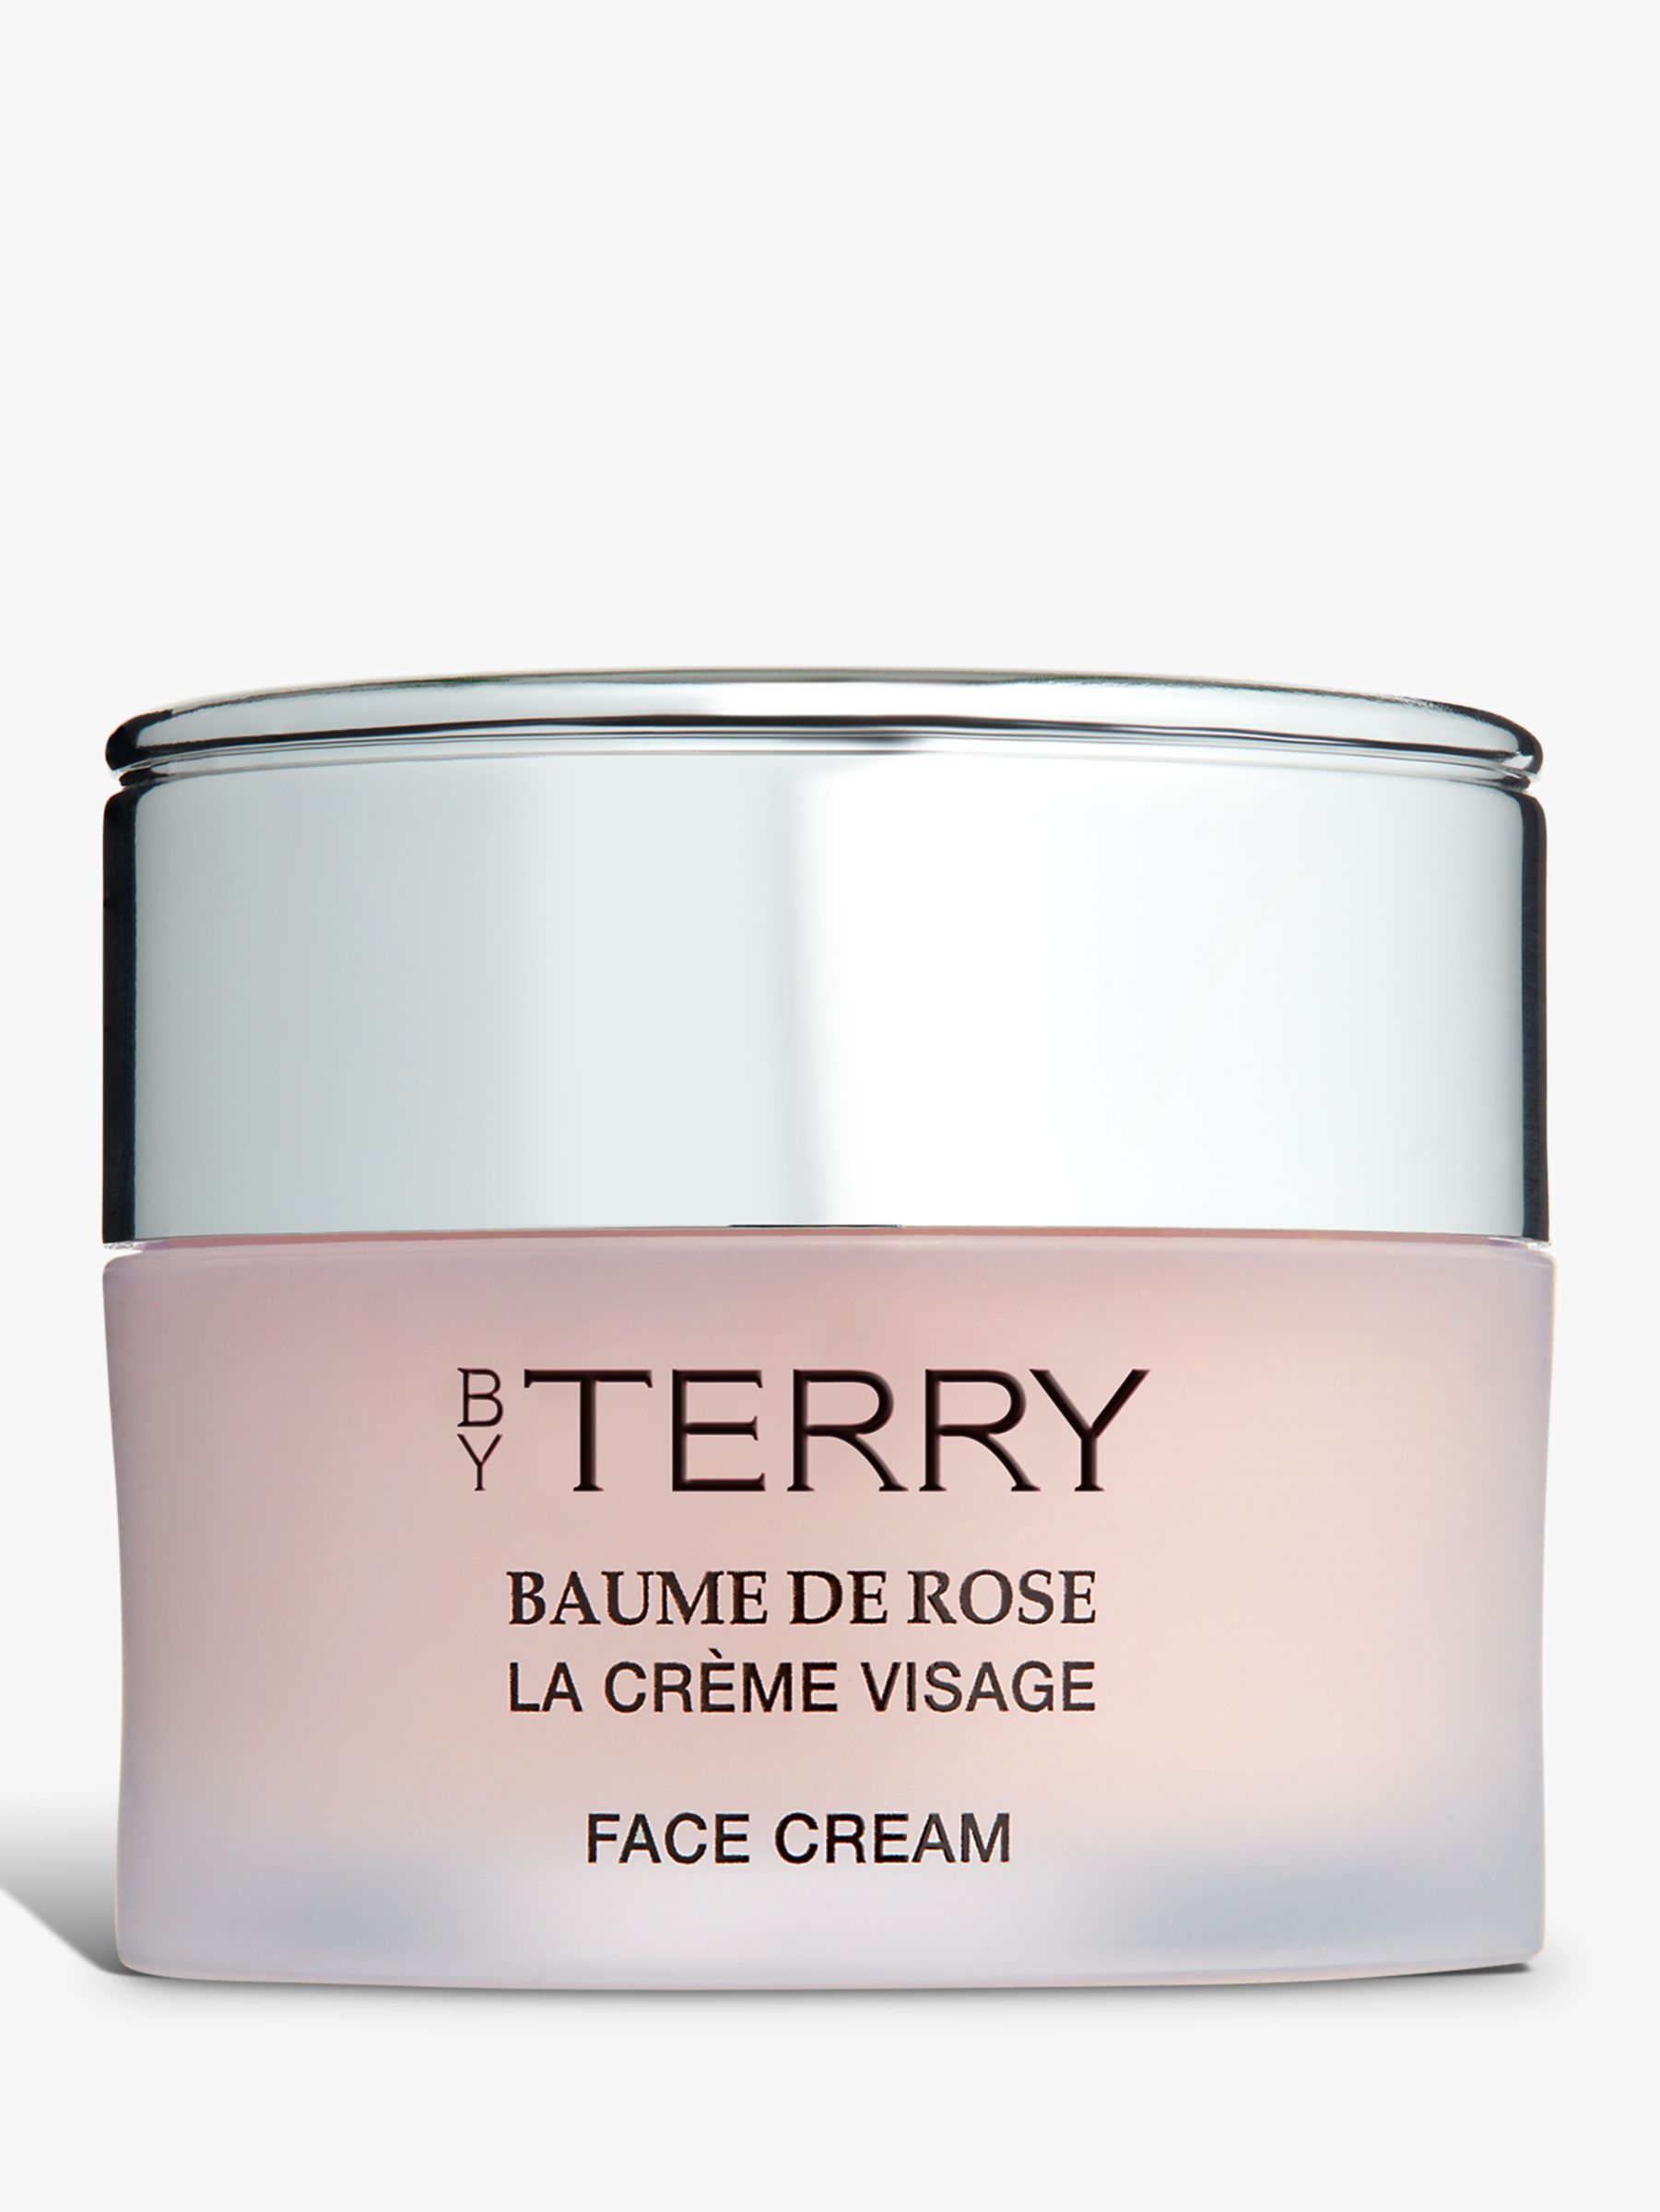 BY TERRY Baume de Rose Face Cream, 50ml at John Lewis & Partners